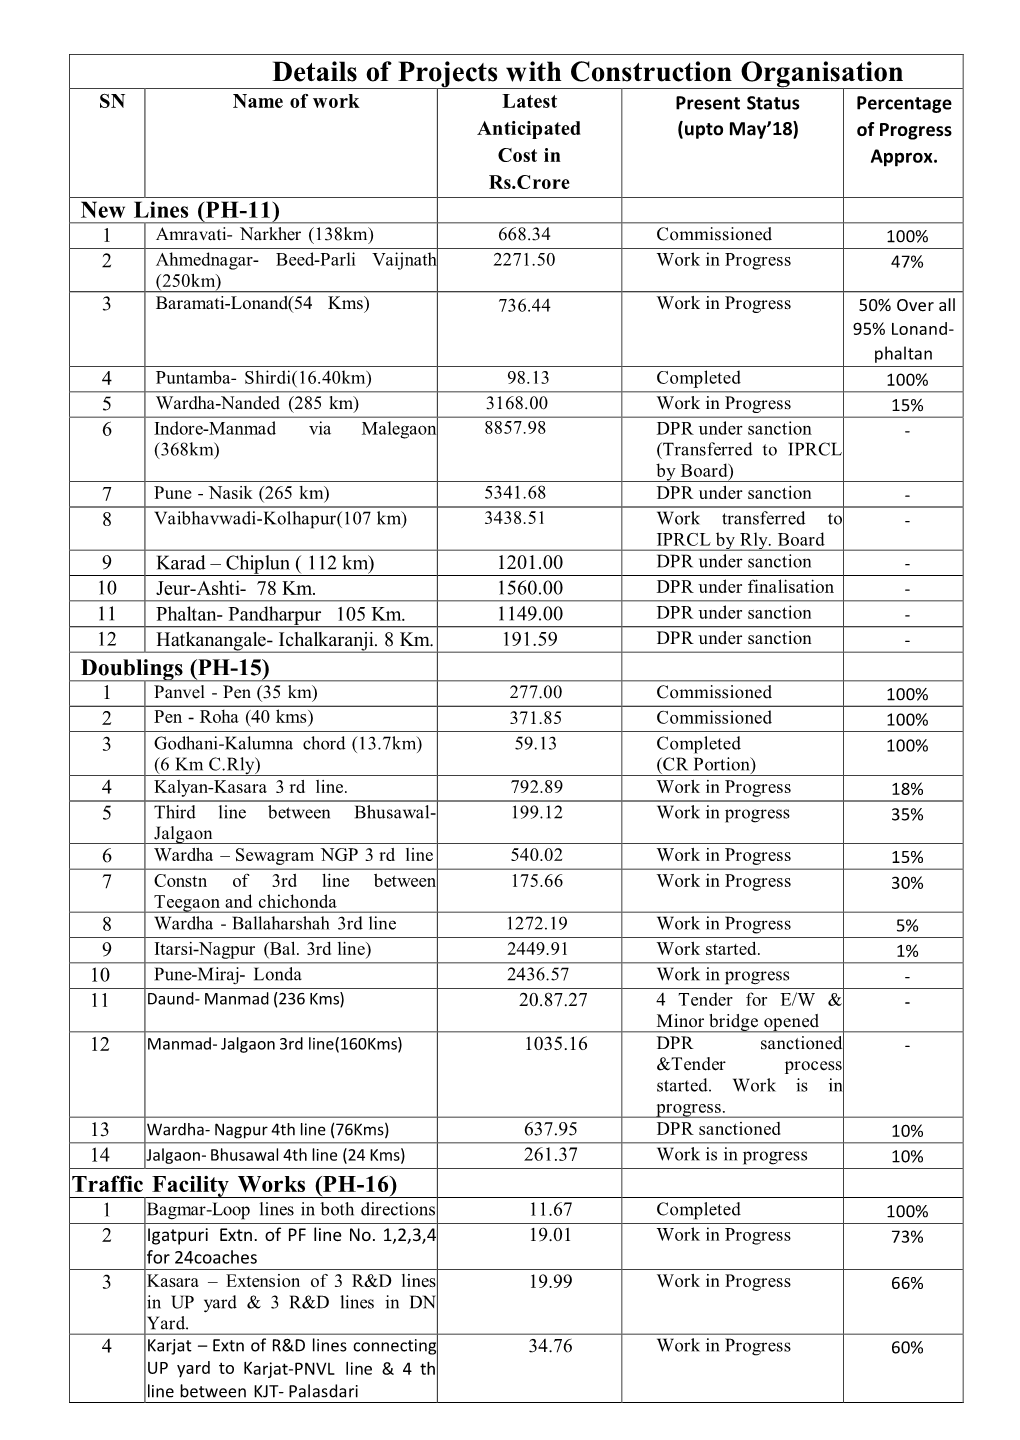 Details of Projects with Construction Organisation SN Name of Work Latest Present Status Percentage Anticipated (Upto May’18) of Progress Cost in Approx